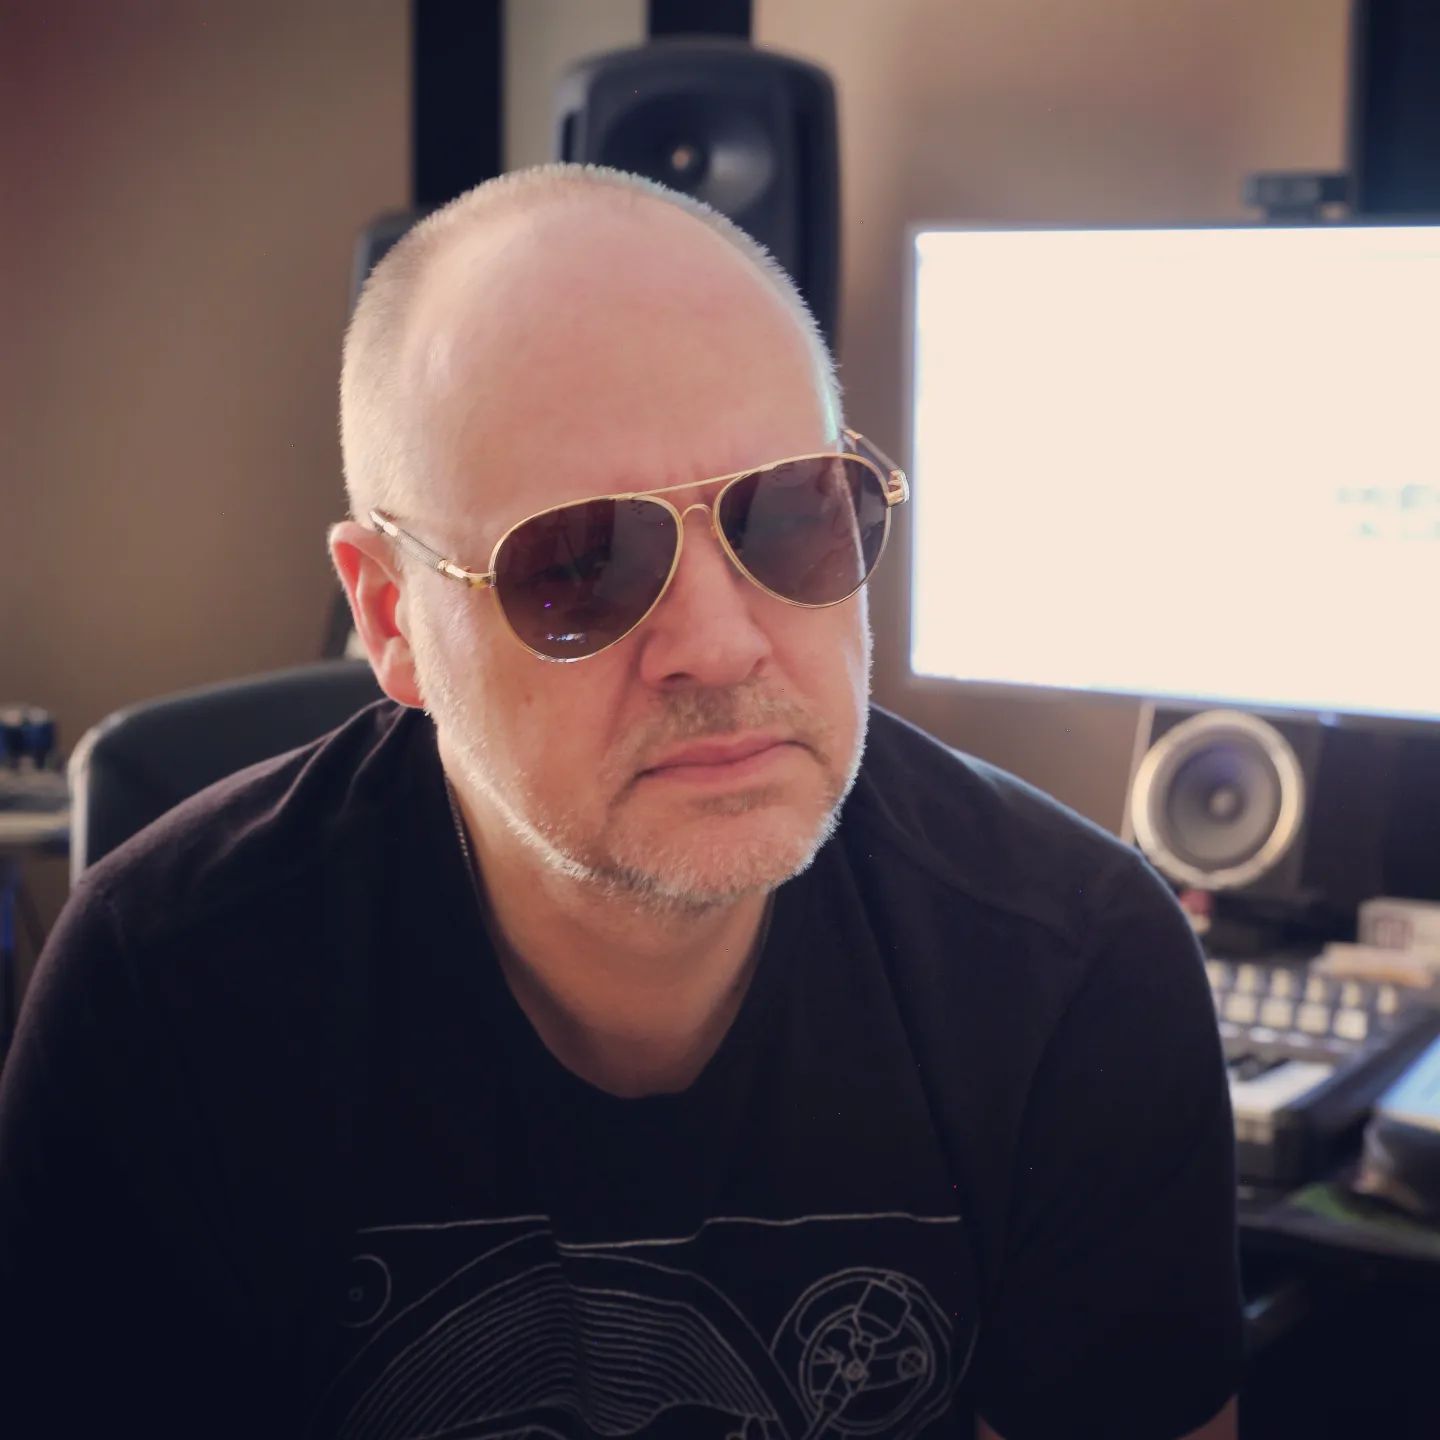 Lol, dark glasses on when critically listening to a mix 😎. It's a thing I like to do sometimes to force me to use my ears rather than my eyes to assess a mix. 👌 #studiolife #musicproduction